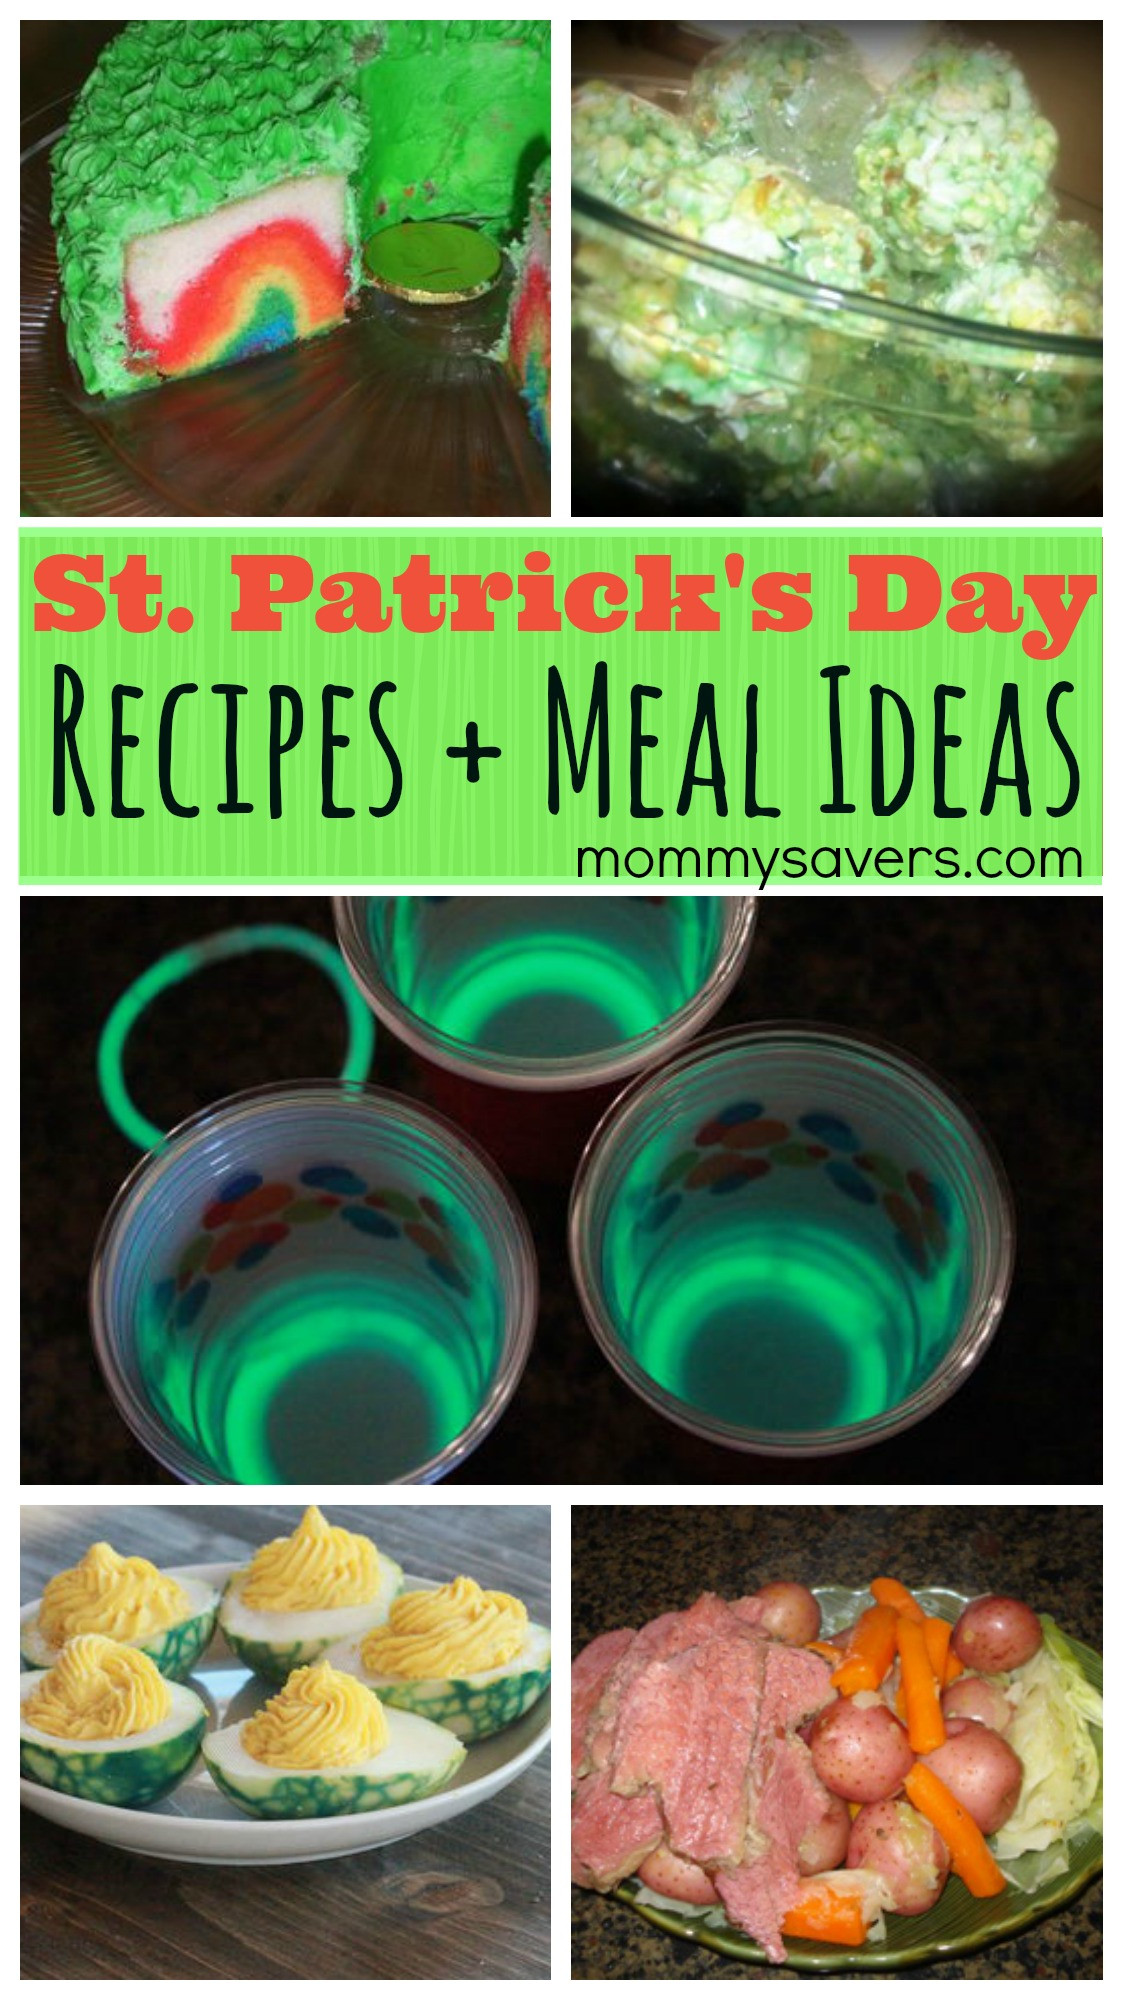 St Patrick's Day Food Specials
 St Patrick s Day Recipes and Meal Ideas